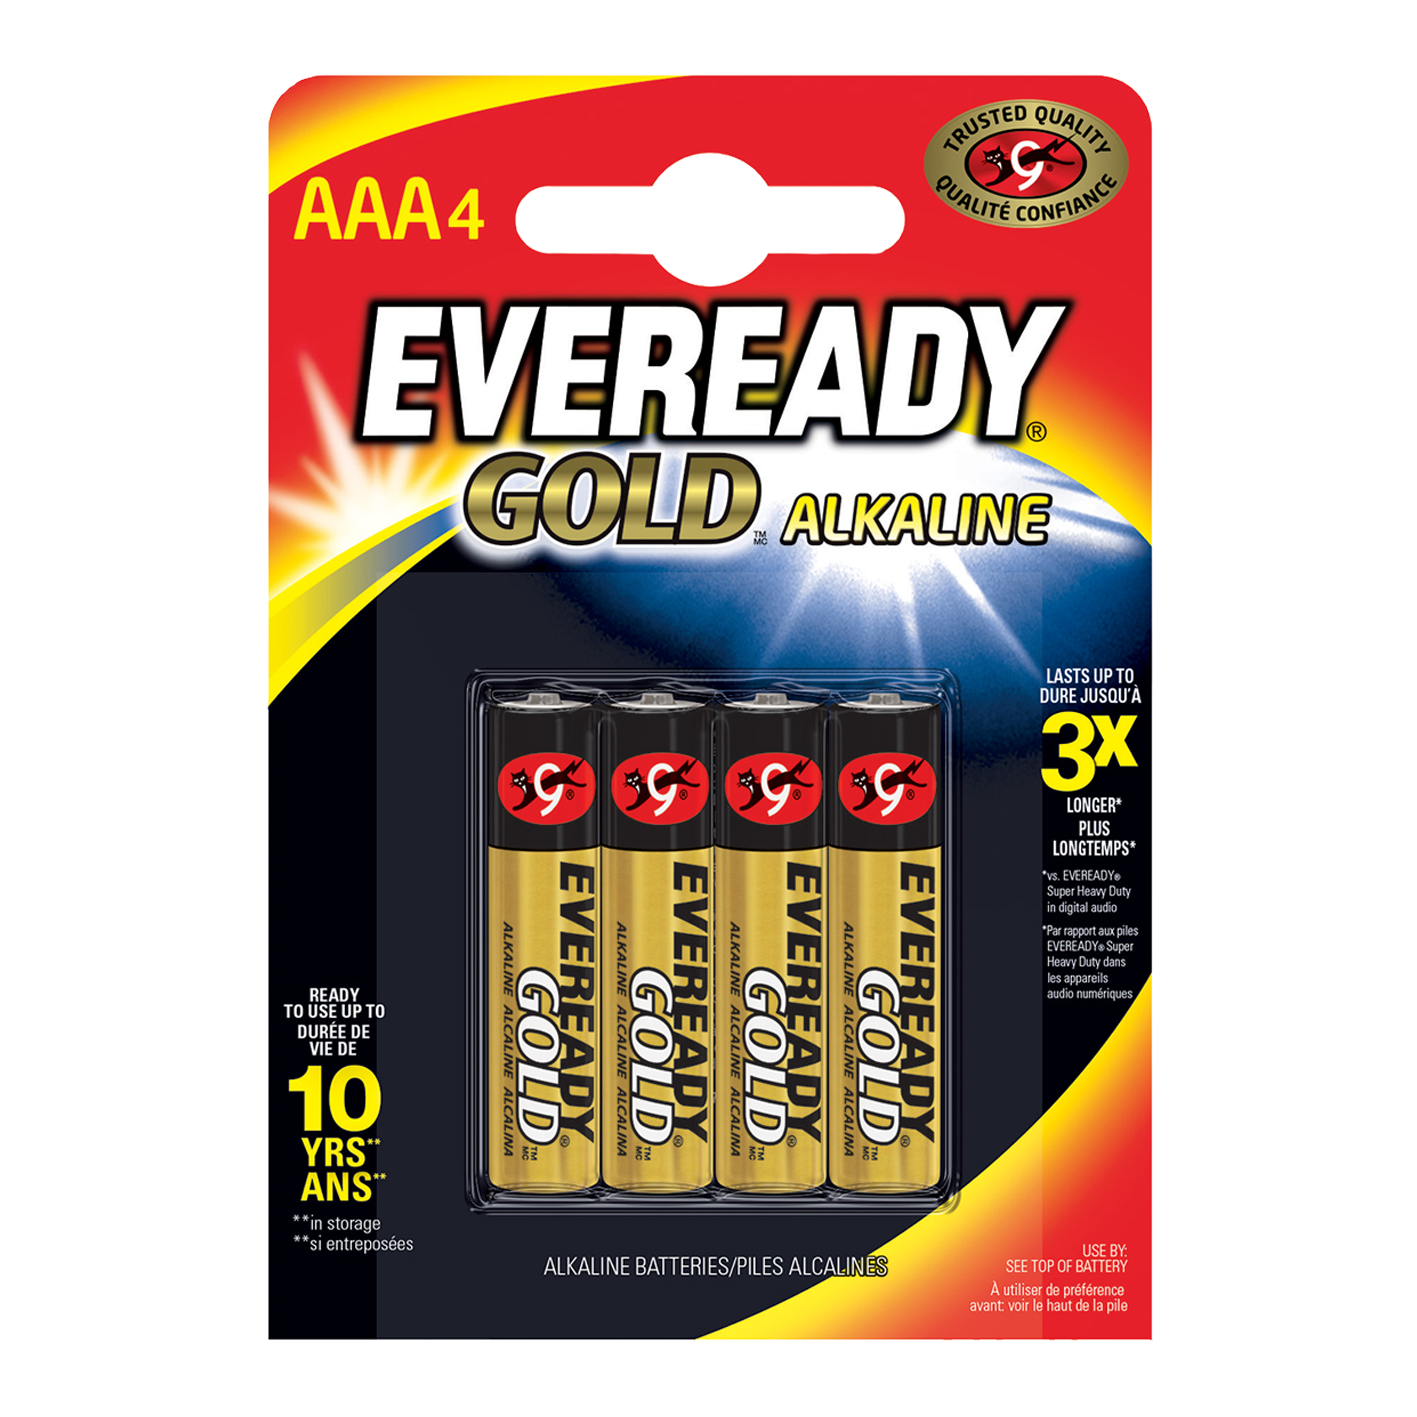 Eveready AAA Alkaline Gold, Pack of 4